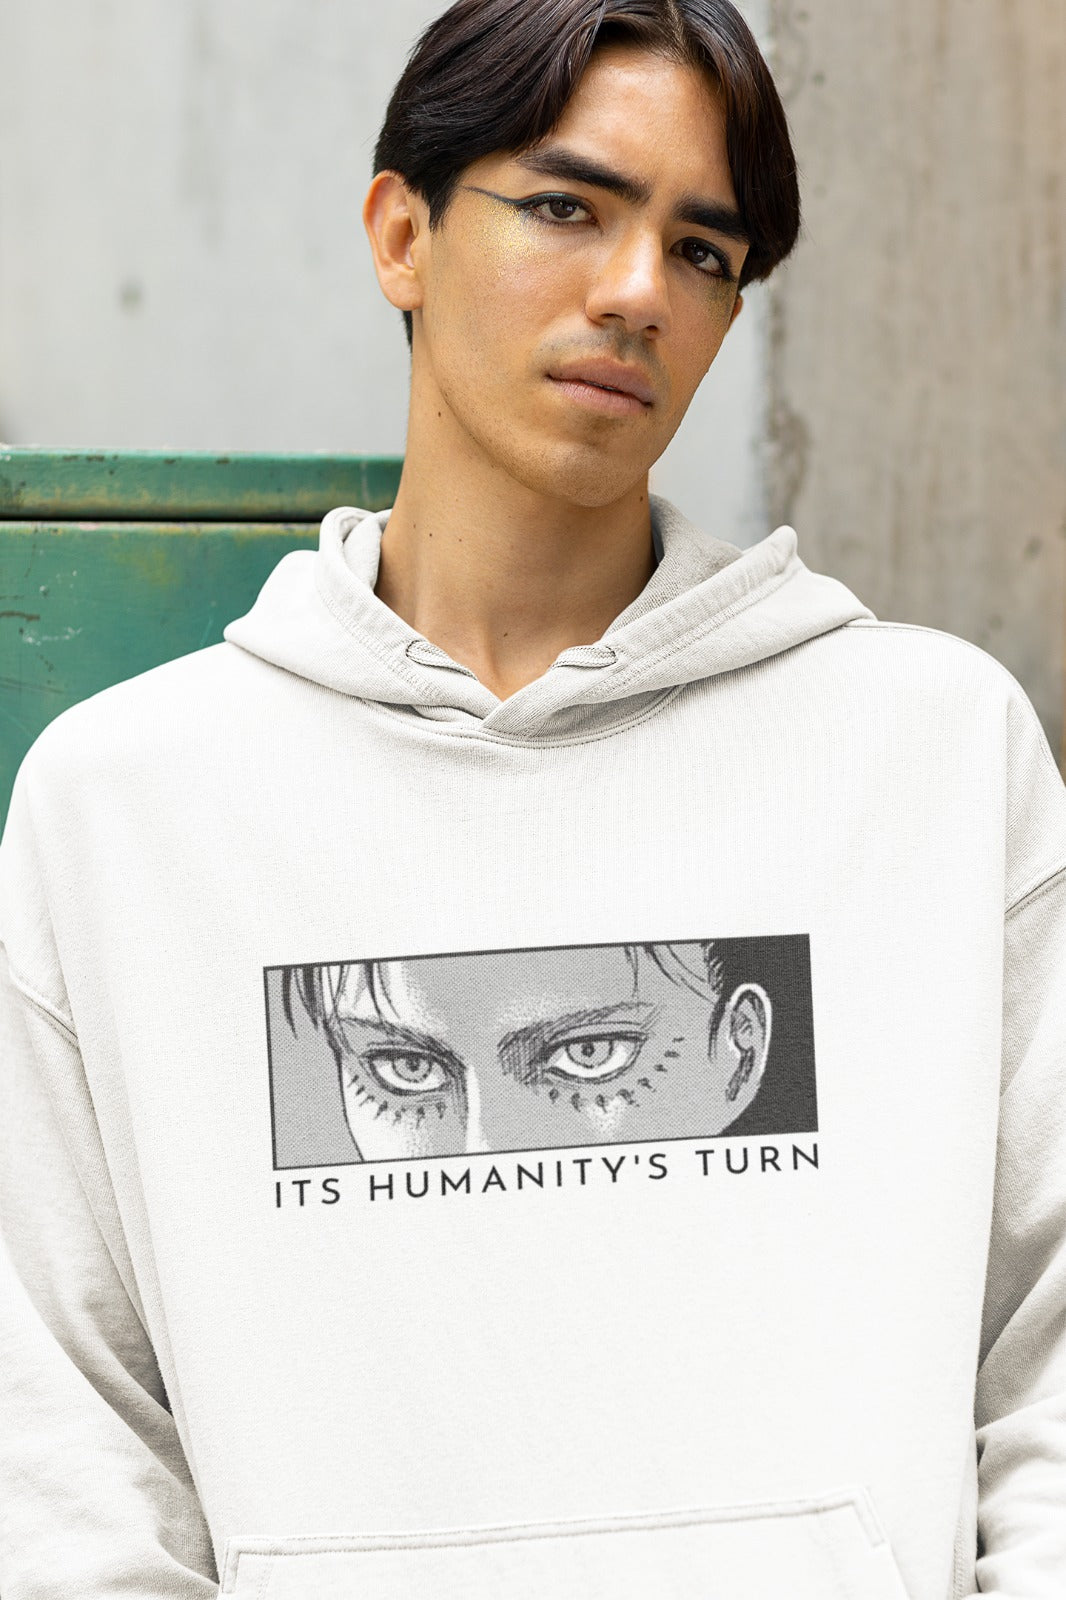 Elevate your style with our White Eren Yeager Oversized Hoodie. This hoodie features a captivating half-face graphic of Eren Yaeger from Attack on Titan, accompanied by the bold caption, "It's humanity's turn." Crafted with care and attention to detail, it's a must-have for fans of this epic series. Express your connection to the battle for humanity in style and comfort. Join the quest with this exclusive oversized hoodie.